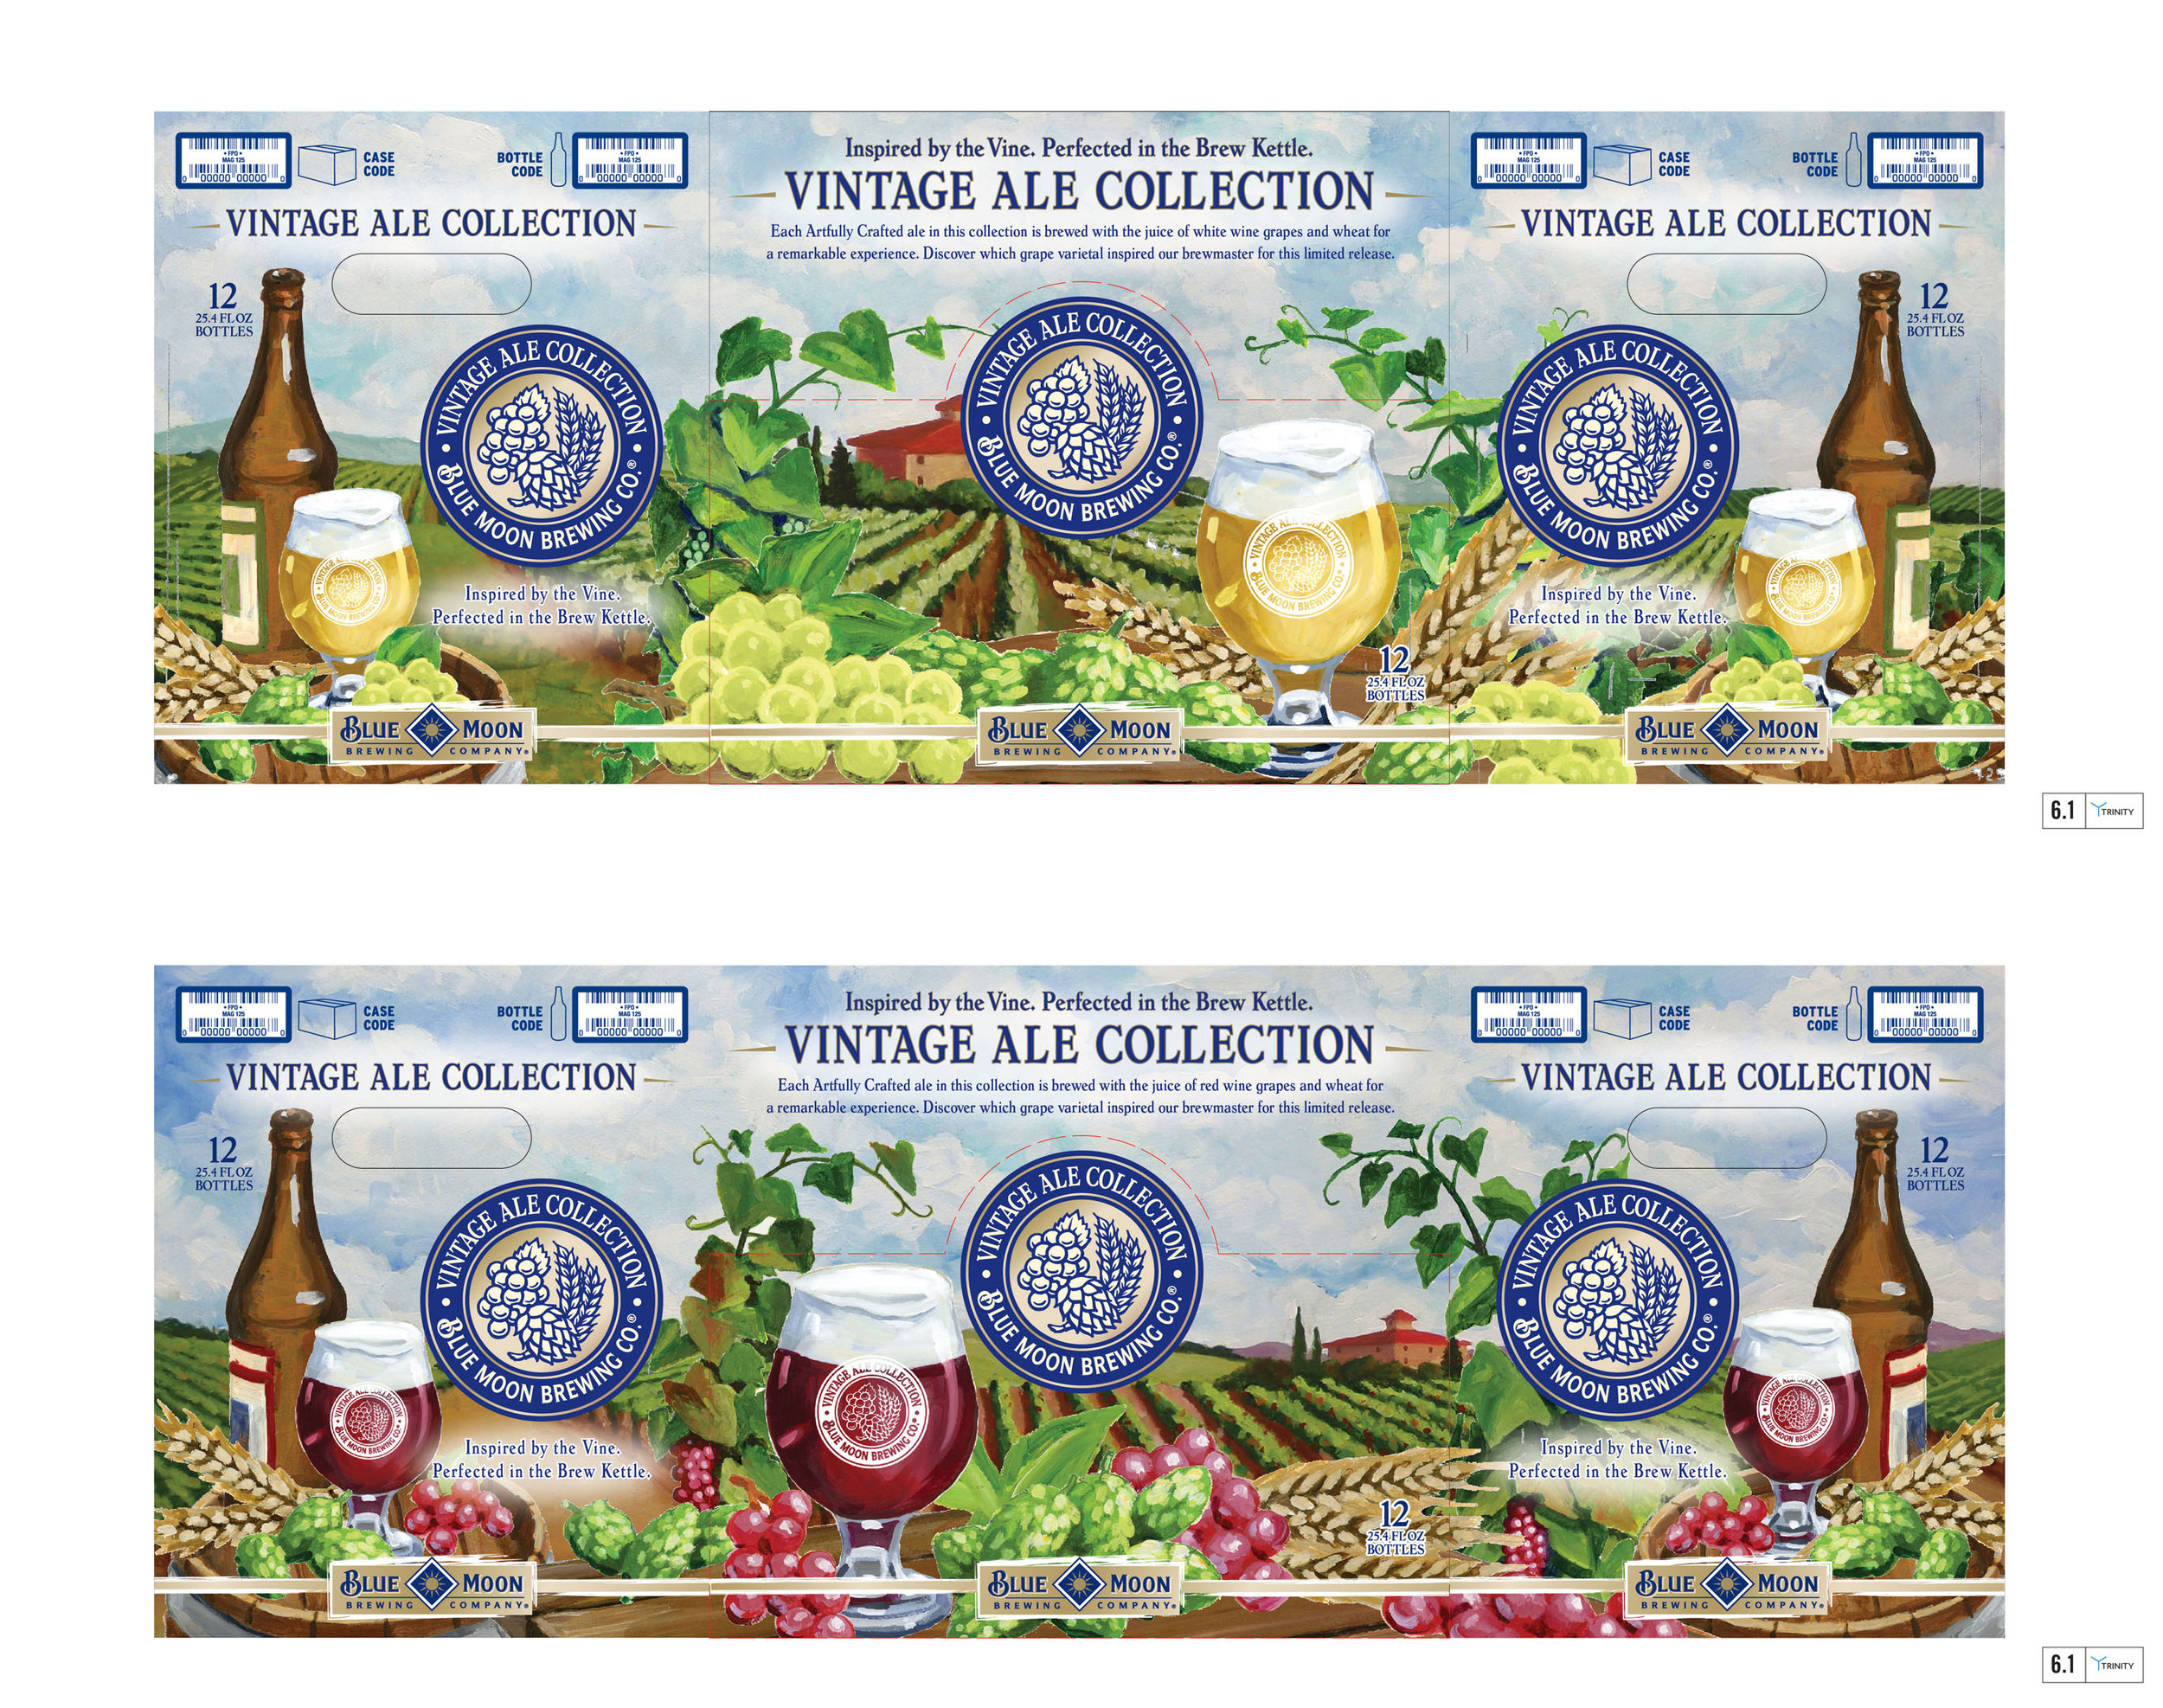  Client: Trinity Branding, Berkeley, CA / Blue Moon Brewing  Assignment: Composite water color elements into final image. 